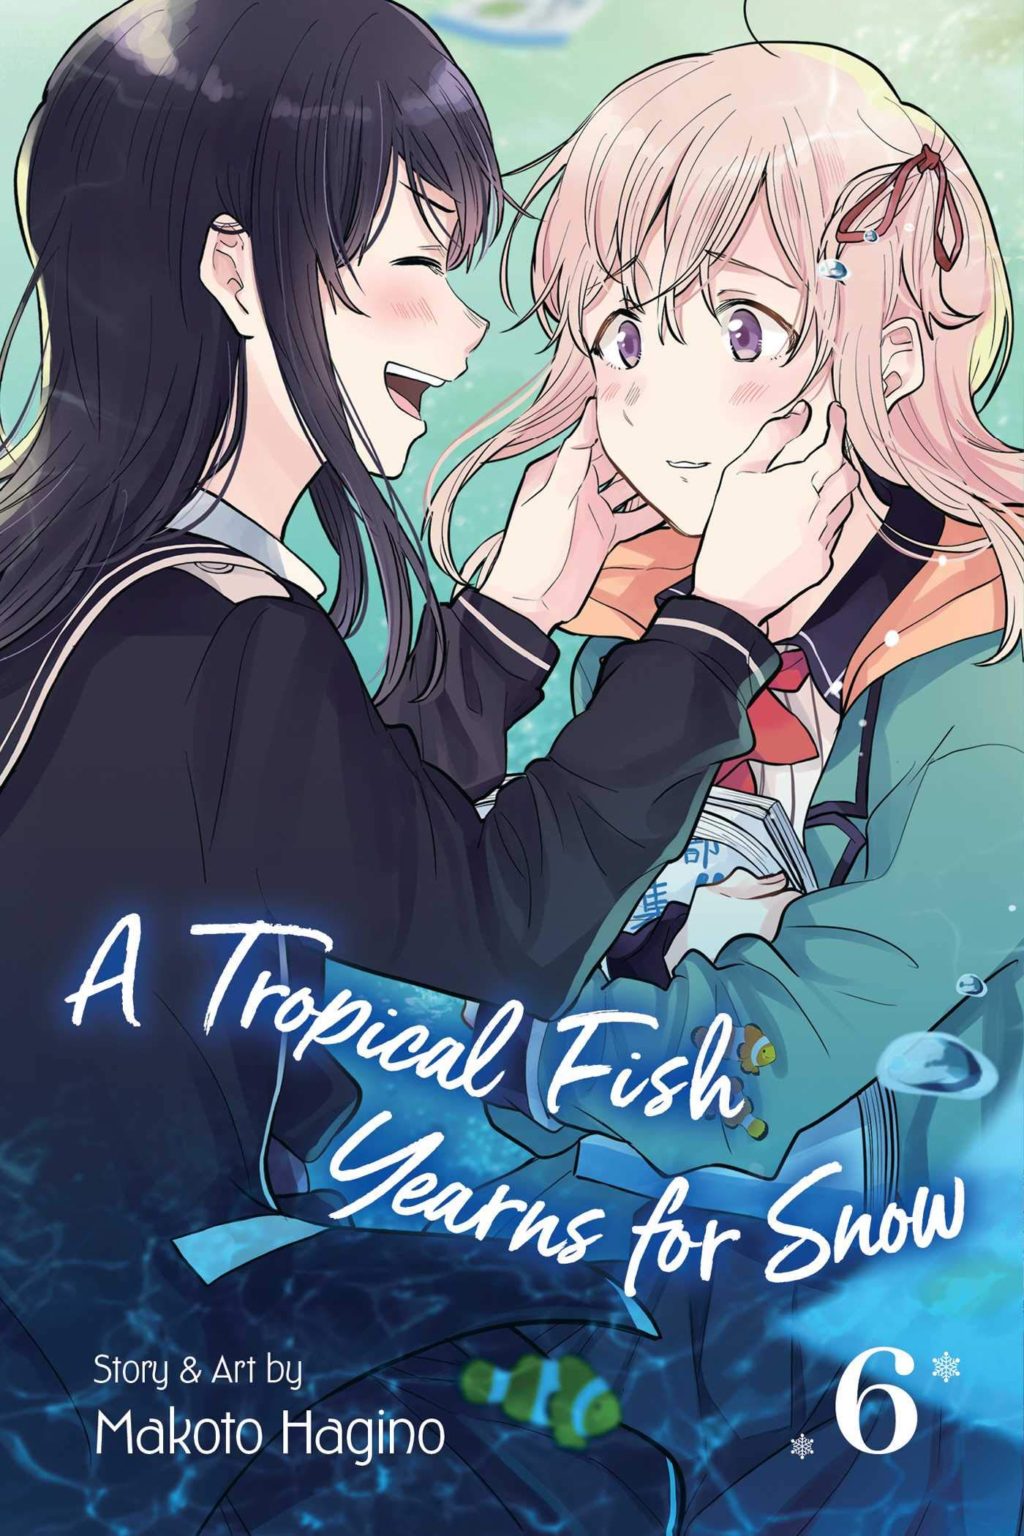 A Tropical Fish Yearns for Snow Volume 6